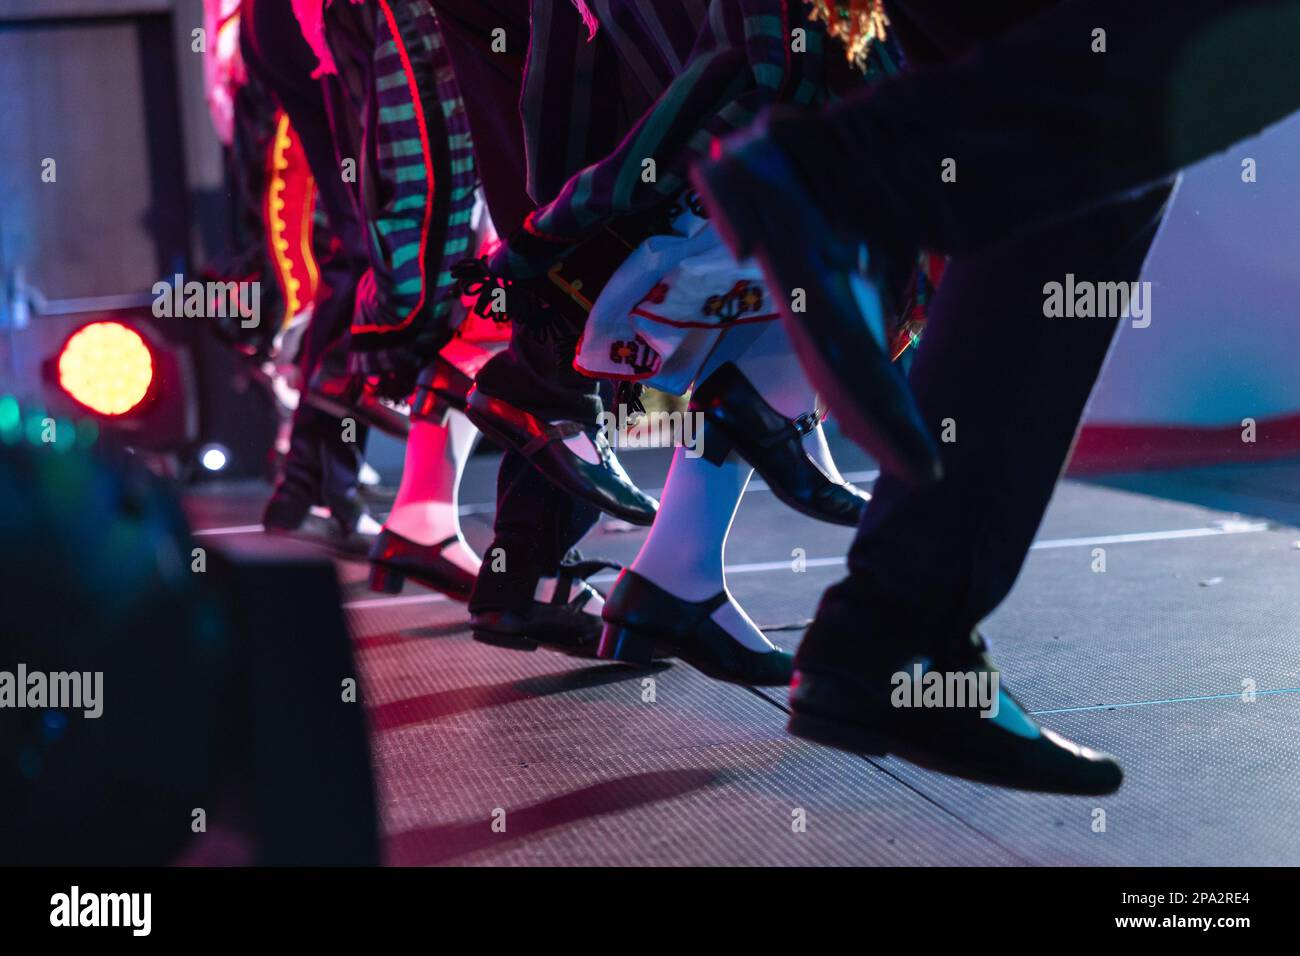 Sofia, Bulgaria - circa 2023 - Traditional Bulgarian dancers on the stage of a conference feet moving in unison. Stock Photo